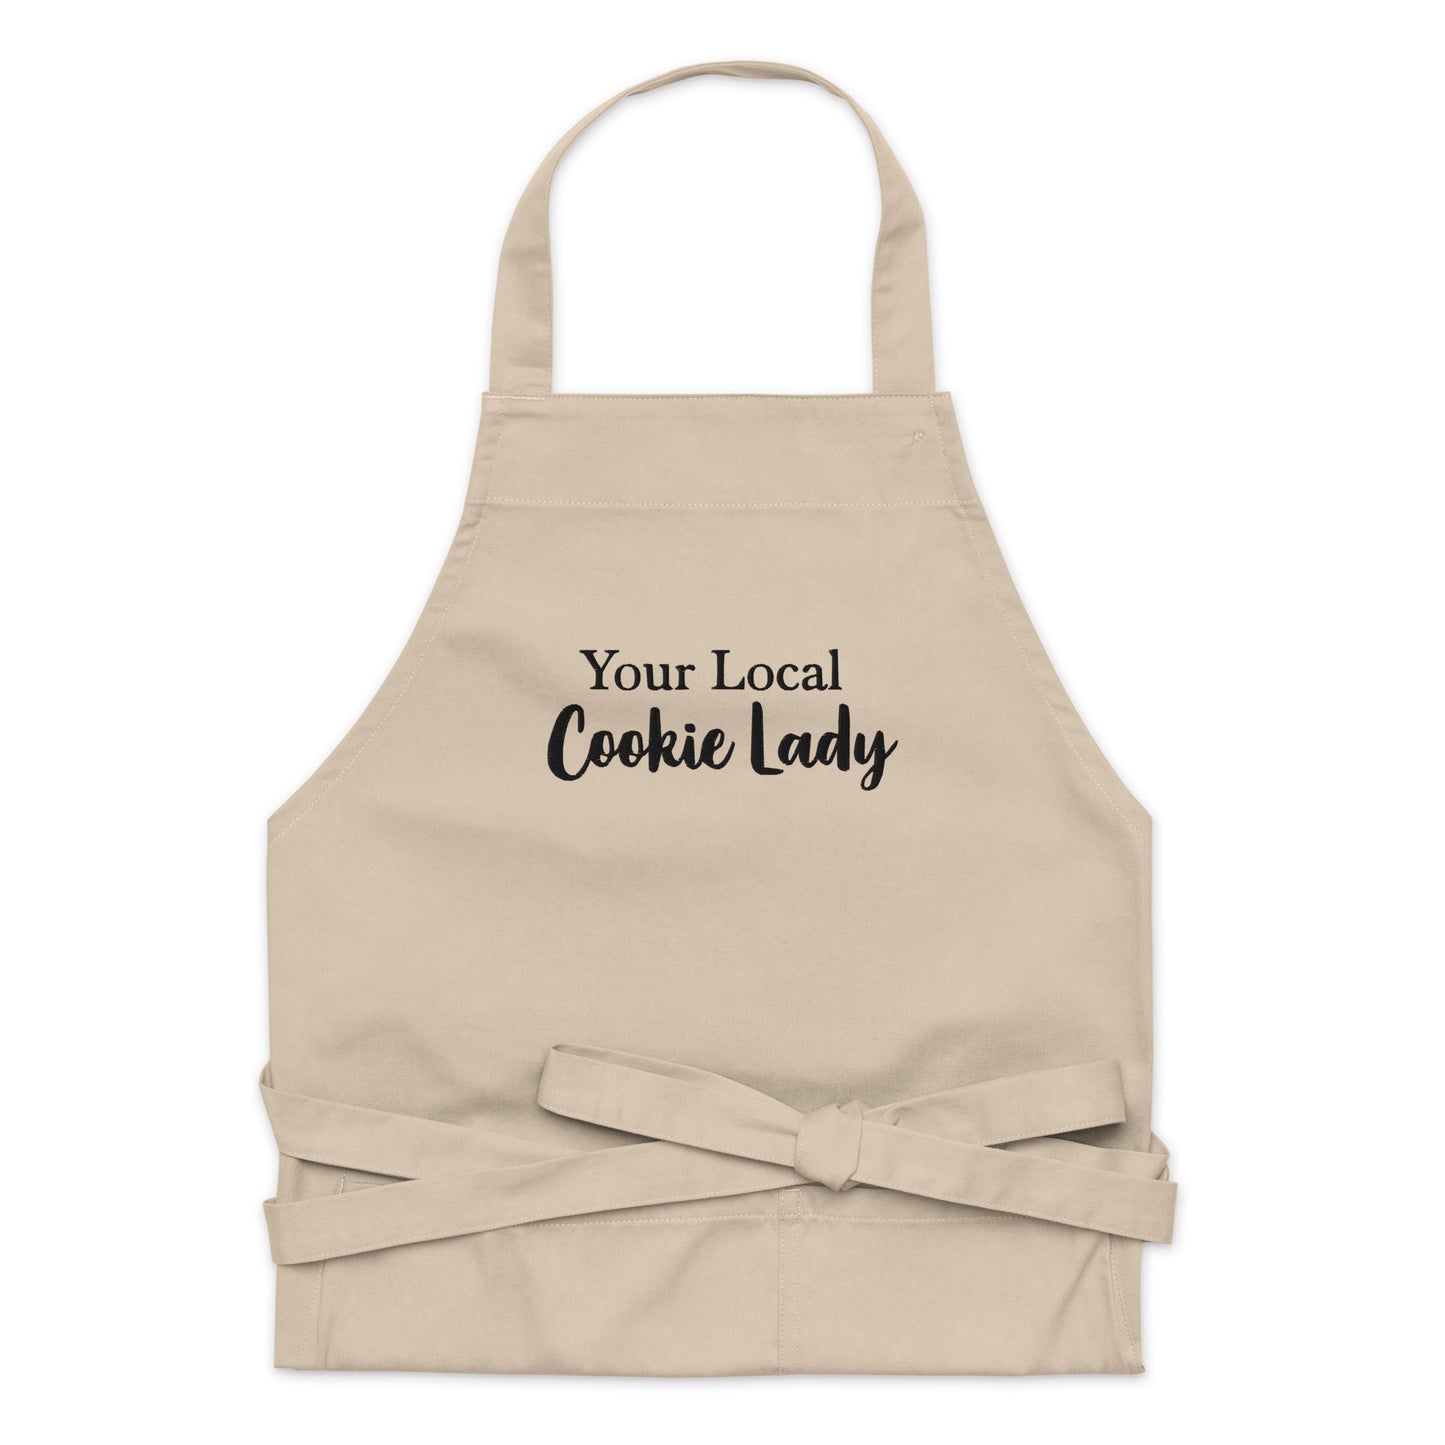 Your Local Cookie Lady - Embroidered - Organic Cotton Apron